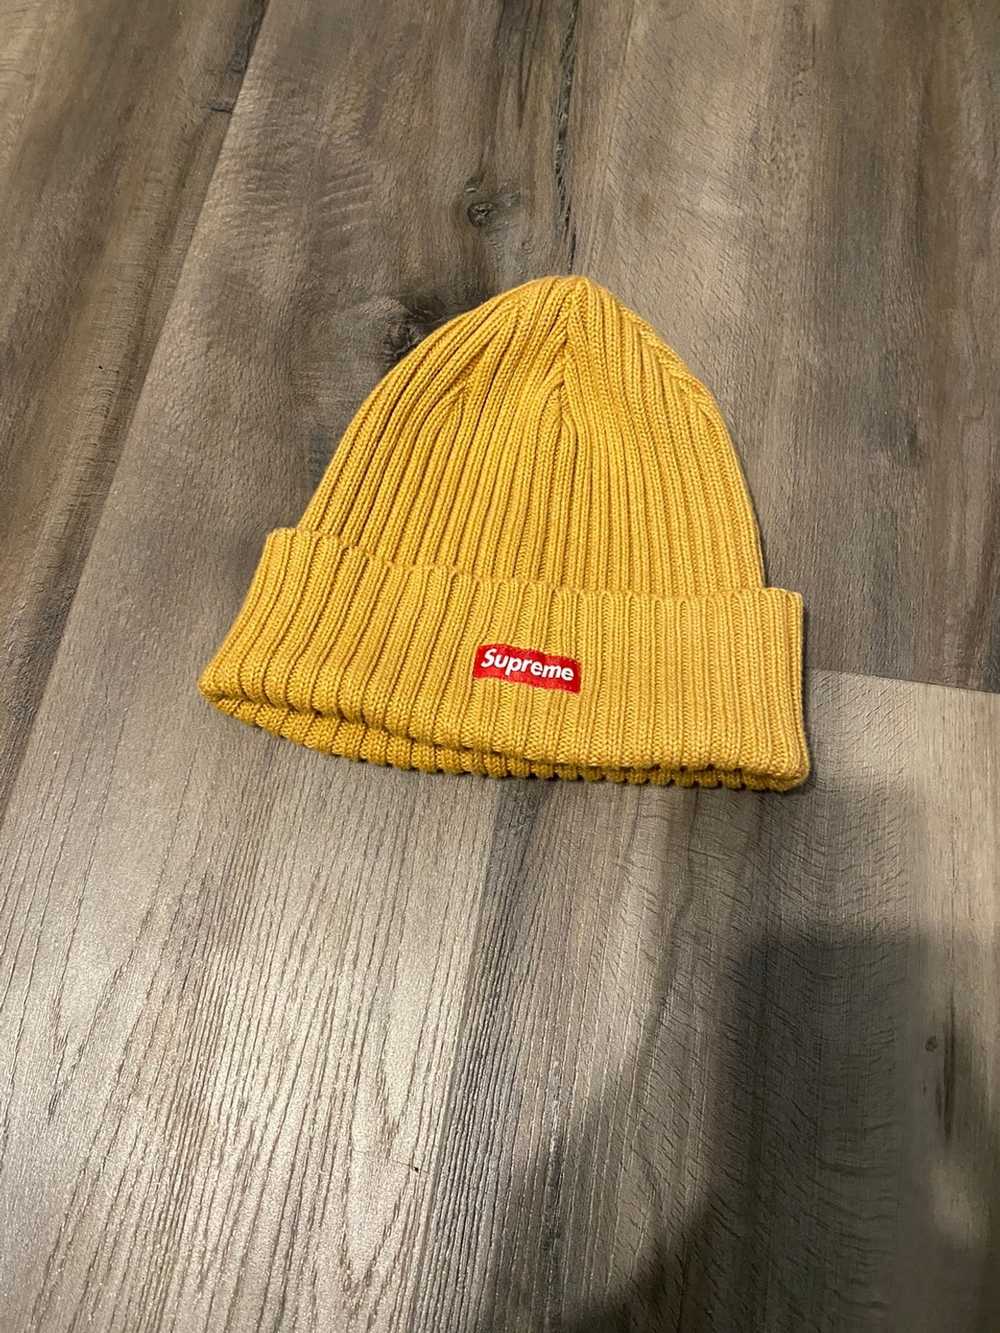 Supreme Supreme Brown Knitted Beanie - image 1